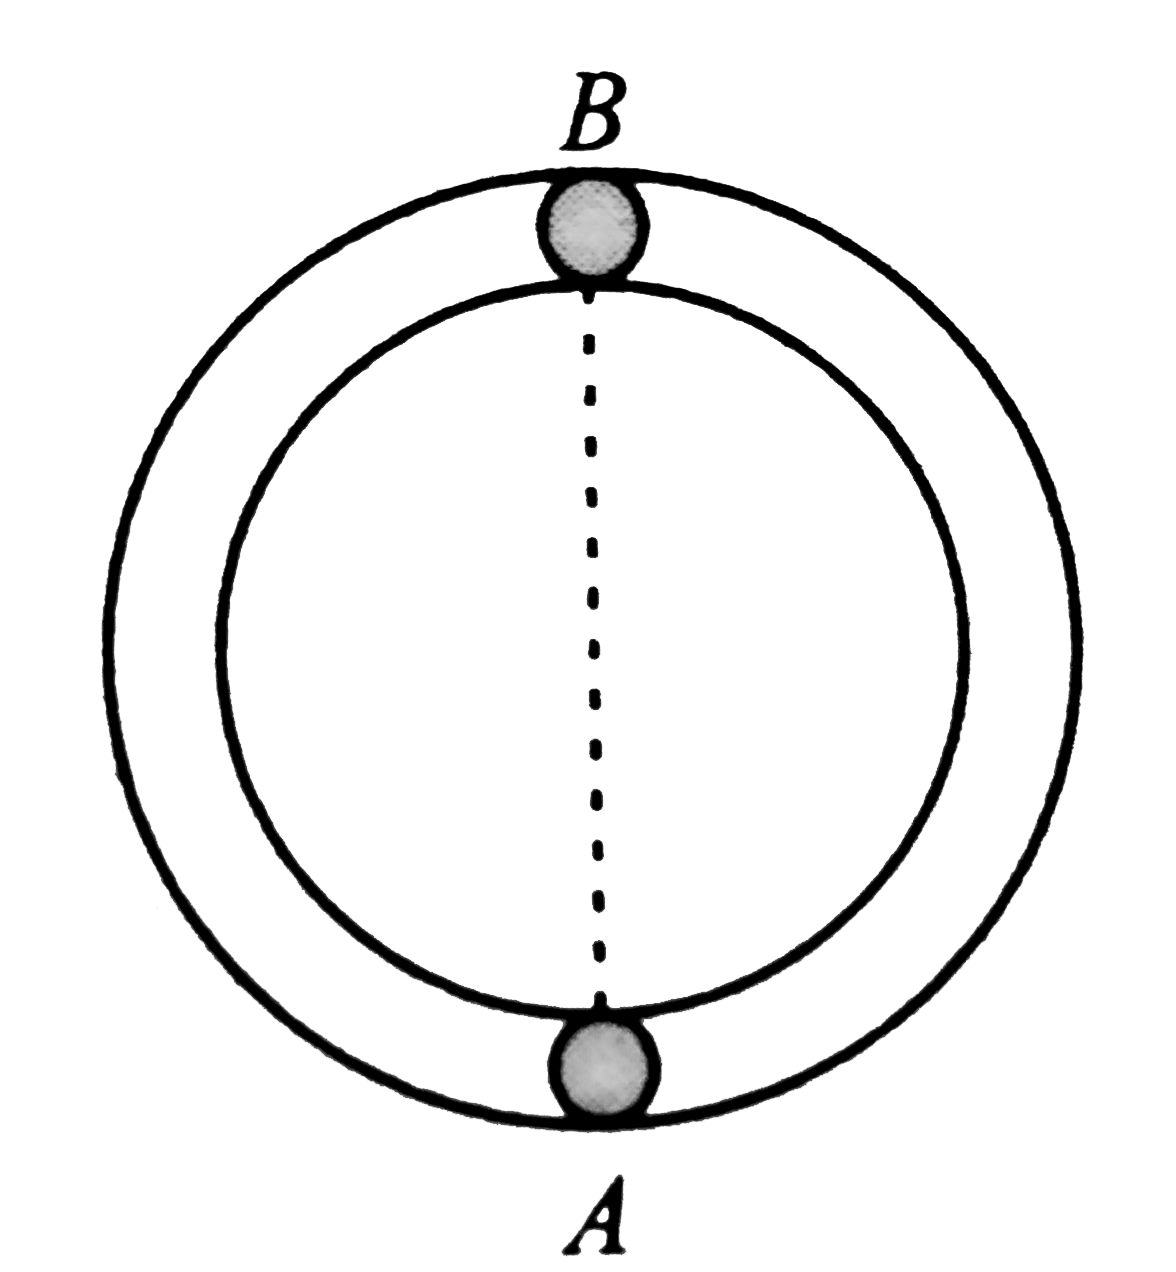 Two equal spheres A and B lie on a smooth horizontal circular groove at opposite ends of a diameter. At time t = 0, A is projected along the groove and it first impinges on B at time t = T(1) and again at time t = T(2). If e is the coefficient of restitution, the ratio T(2)//T(1) is